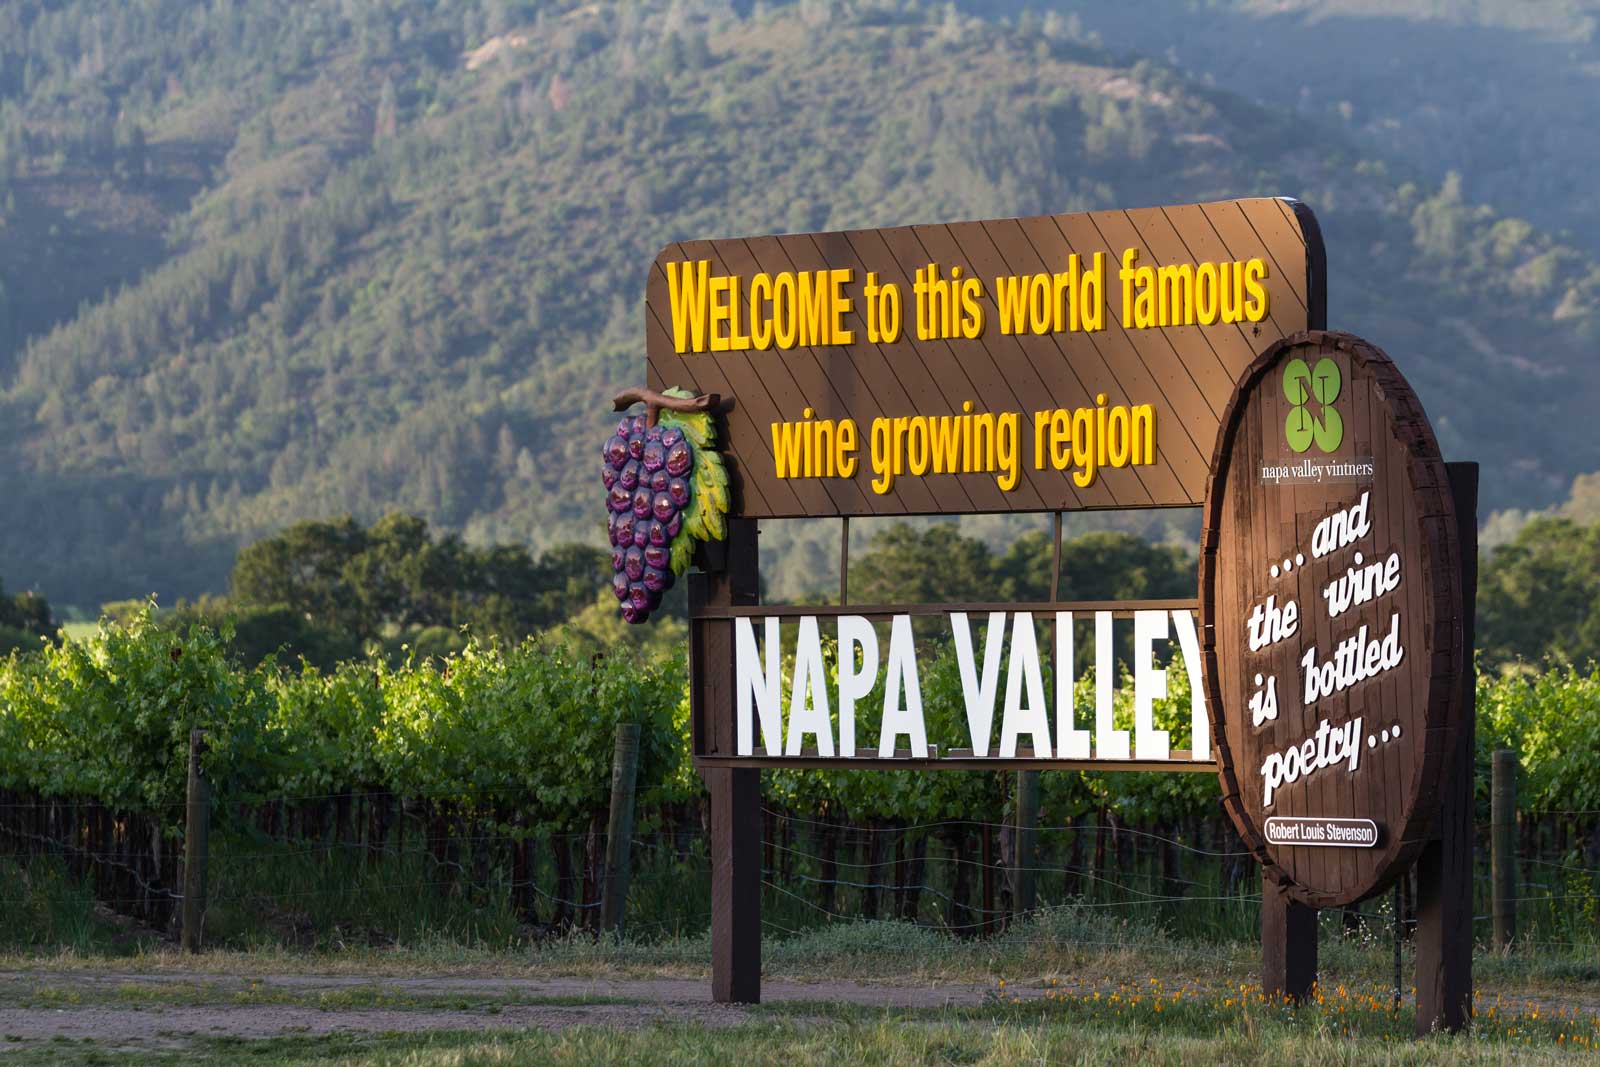 close up of the welcome sign to Napa Valley in California